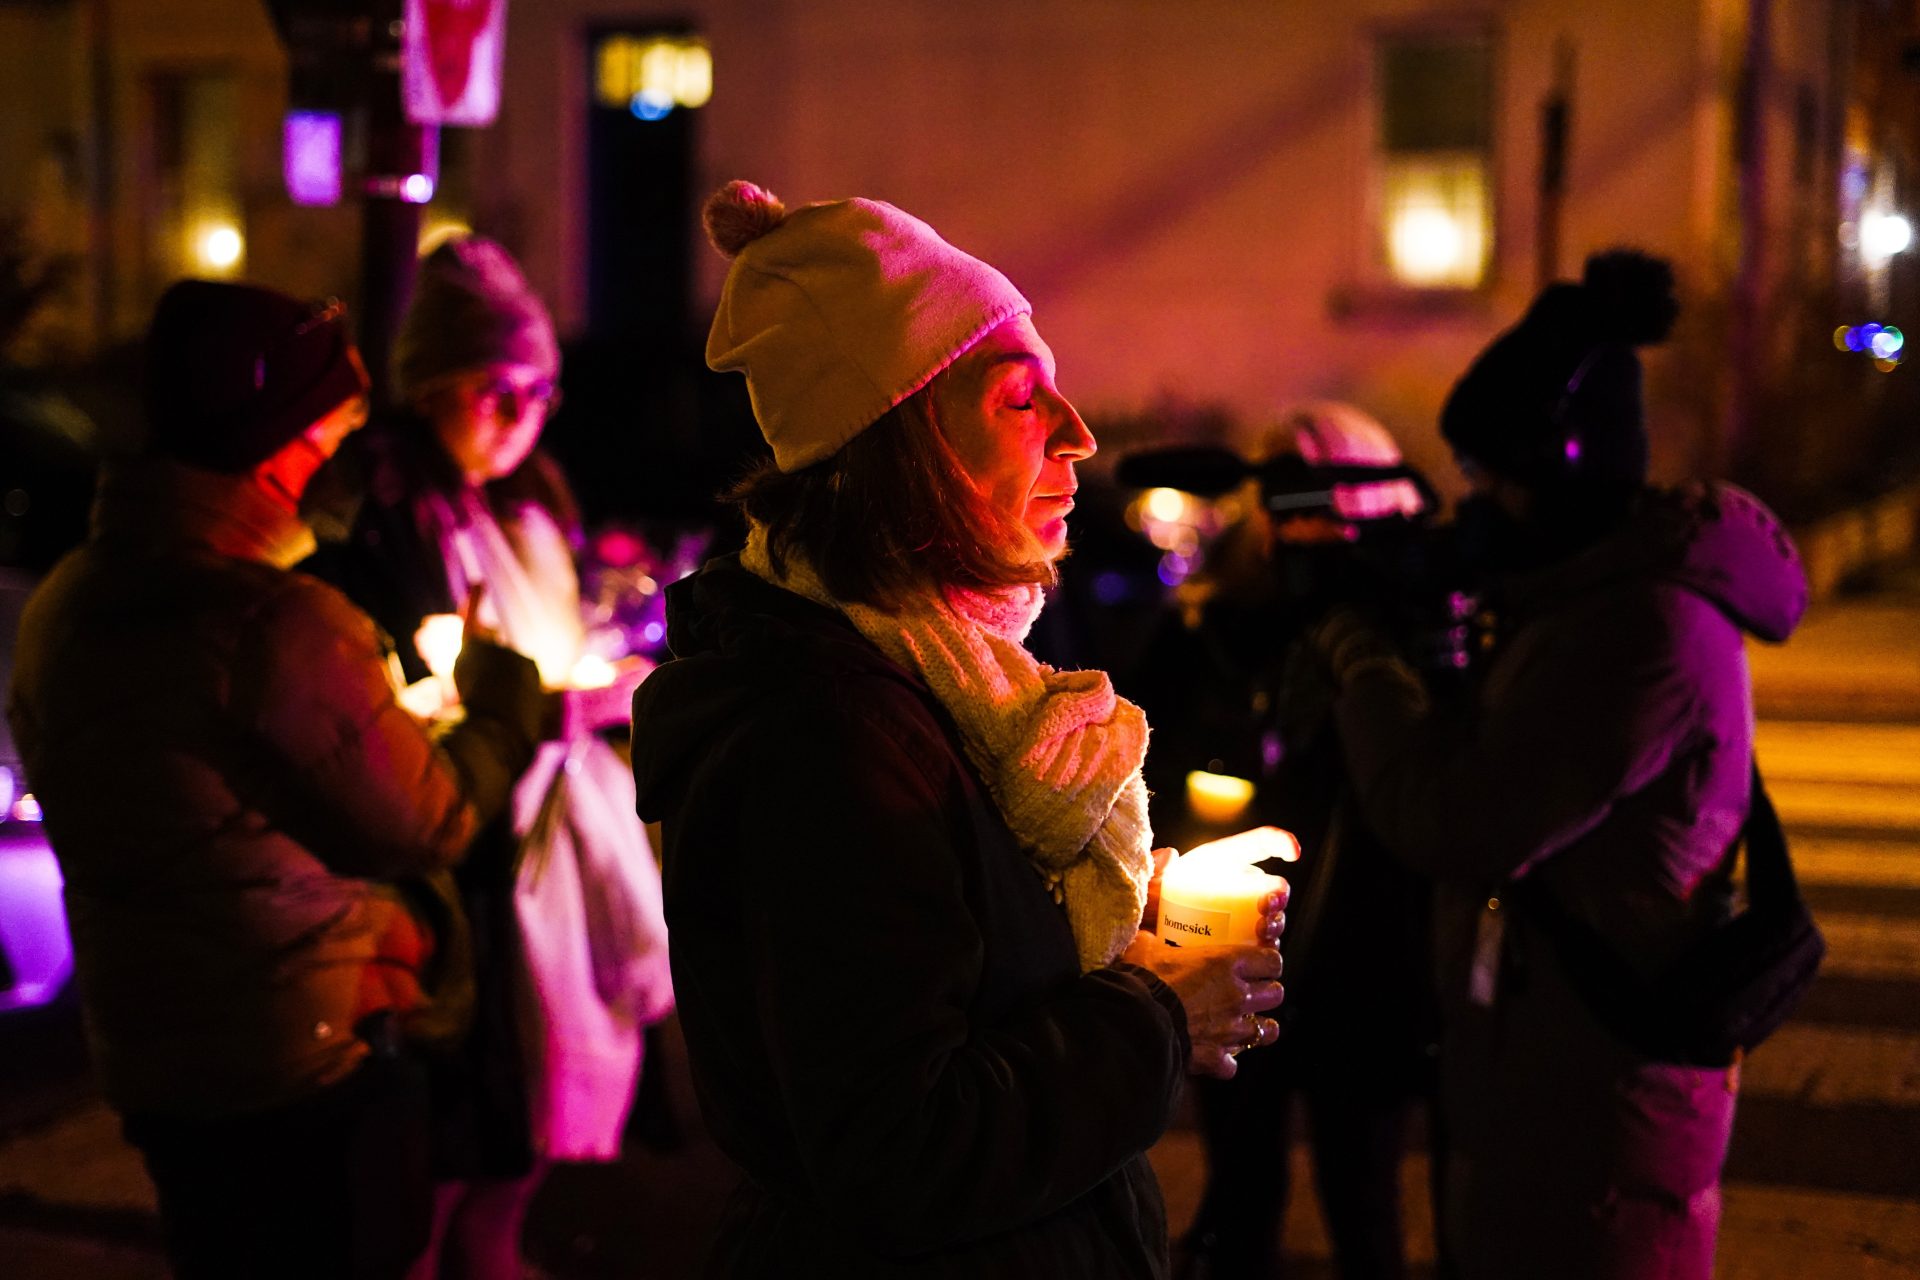 People gather to pay their respects after a deadly row house fire, Wednesday, Jan. 5, 2022, in the Fairmount neighborhood of Philadelphia.